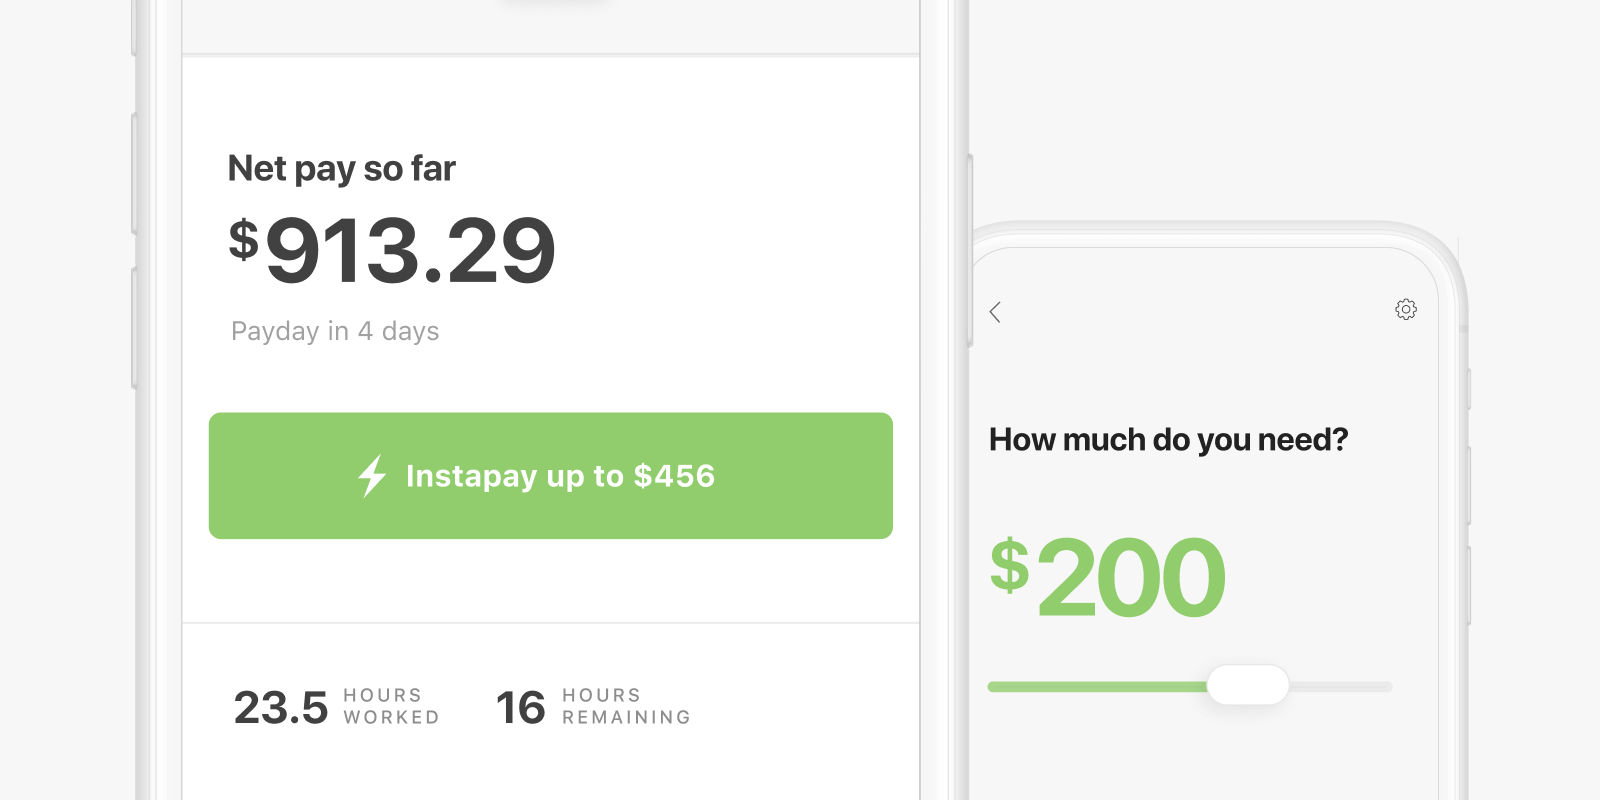 The Even app's Instapay screen, showing a fictional member's net pay earned of $913.29 so far, and the ability to request up to $456 as an Instapay.